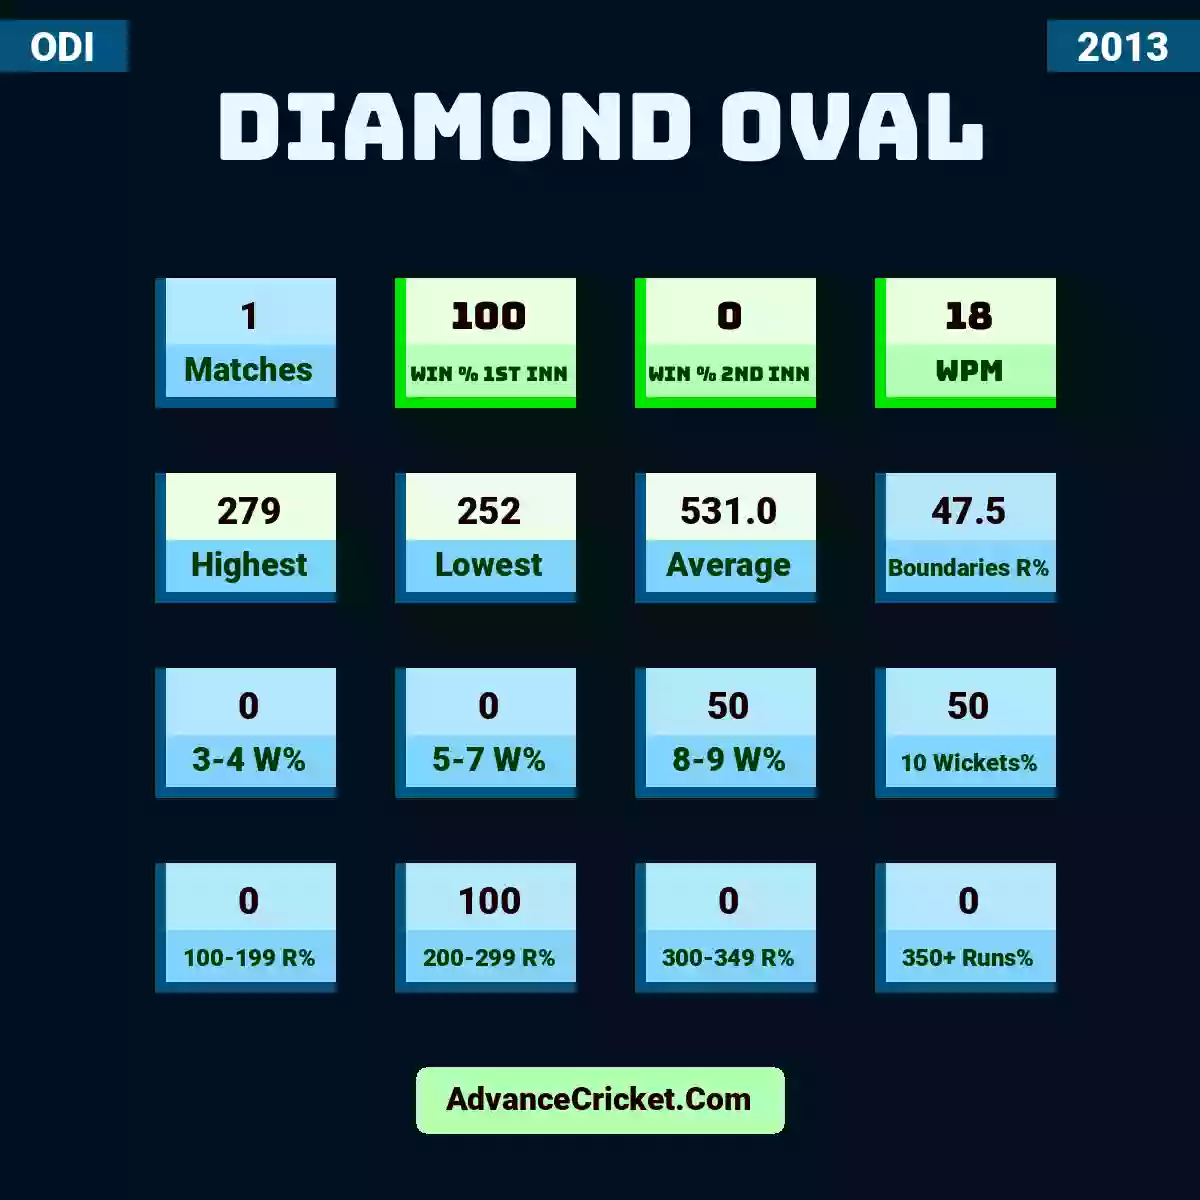 Image showing Diamond Oval with Matches: 1, Win % 1st Inn: 100, Win % 2nd Inn: 0, WPM: 18, Highest: 279, Lowest: 252, Average: 531.0, Boundaries R%: 47.5, 3-4 W%: 0, 5-7 W%: 0, 8-9 W%: 50, 10 Wickets%: 50, 100-199 R%: 0, 200-299 R%: 100, 300-349 R%: 0, 350+ Runs%: 0.